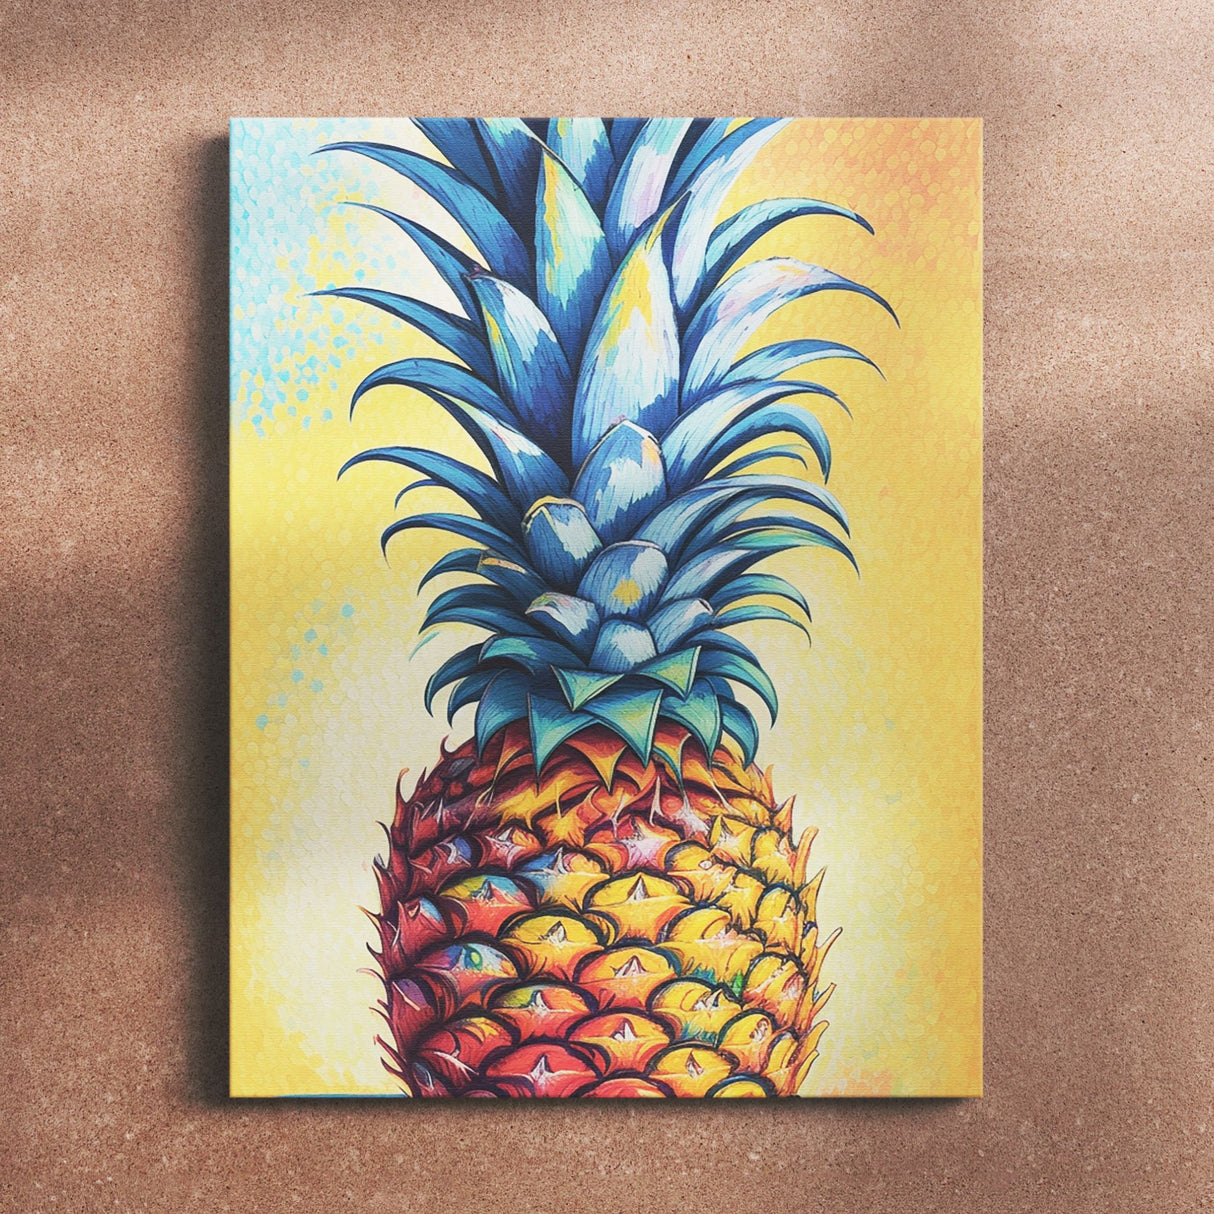 The Blue Pineapple – Kcrookdesign